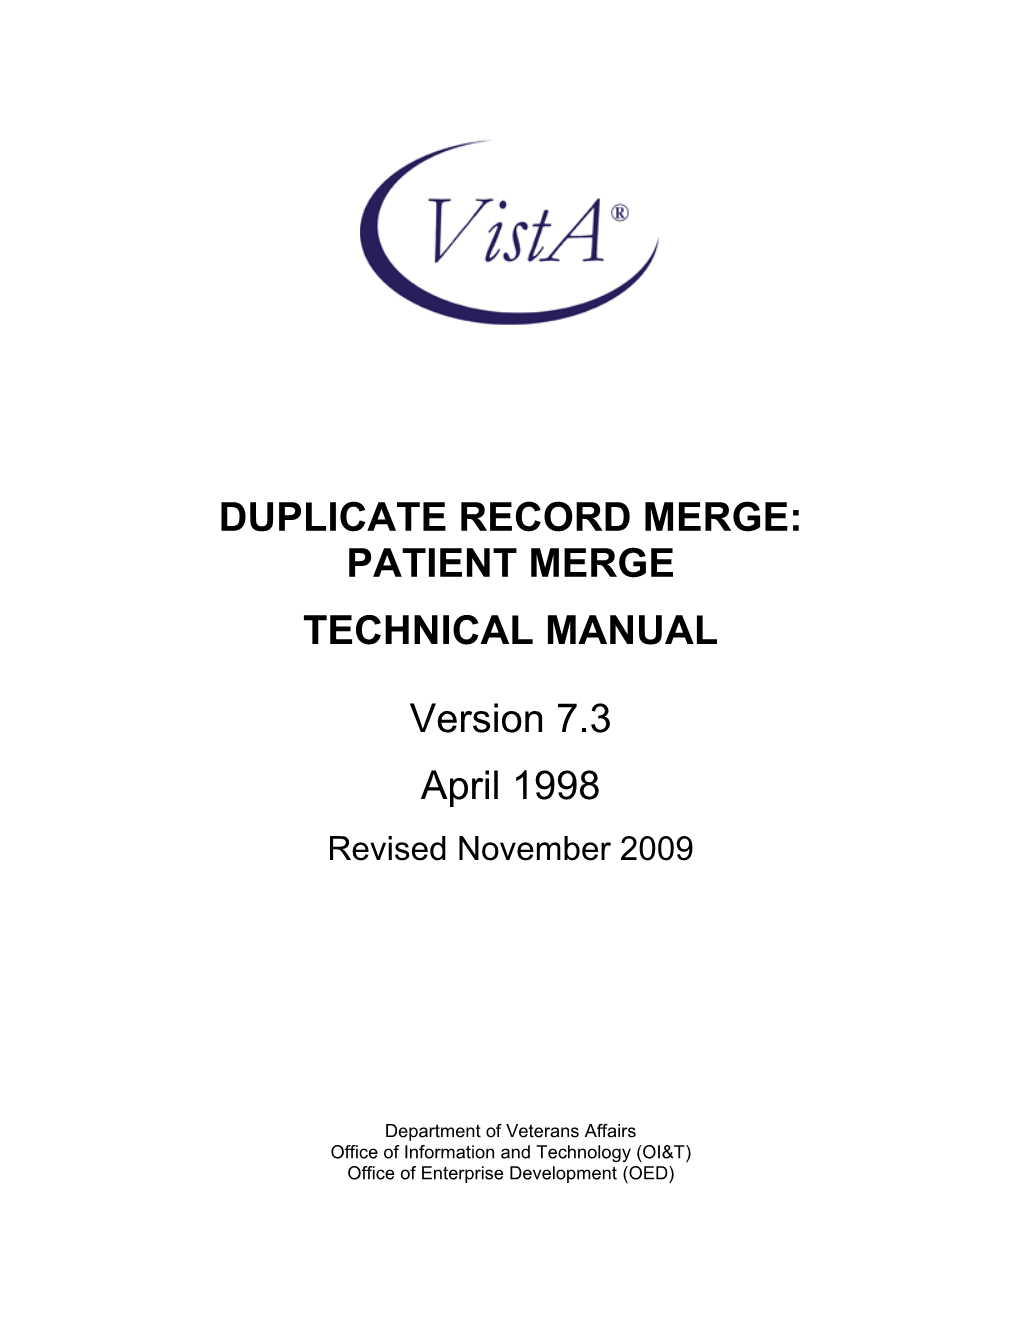 Duplicate Record Merge: Patient Merge Technical Manual